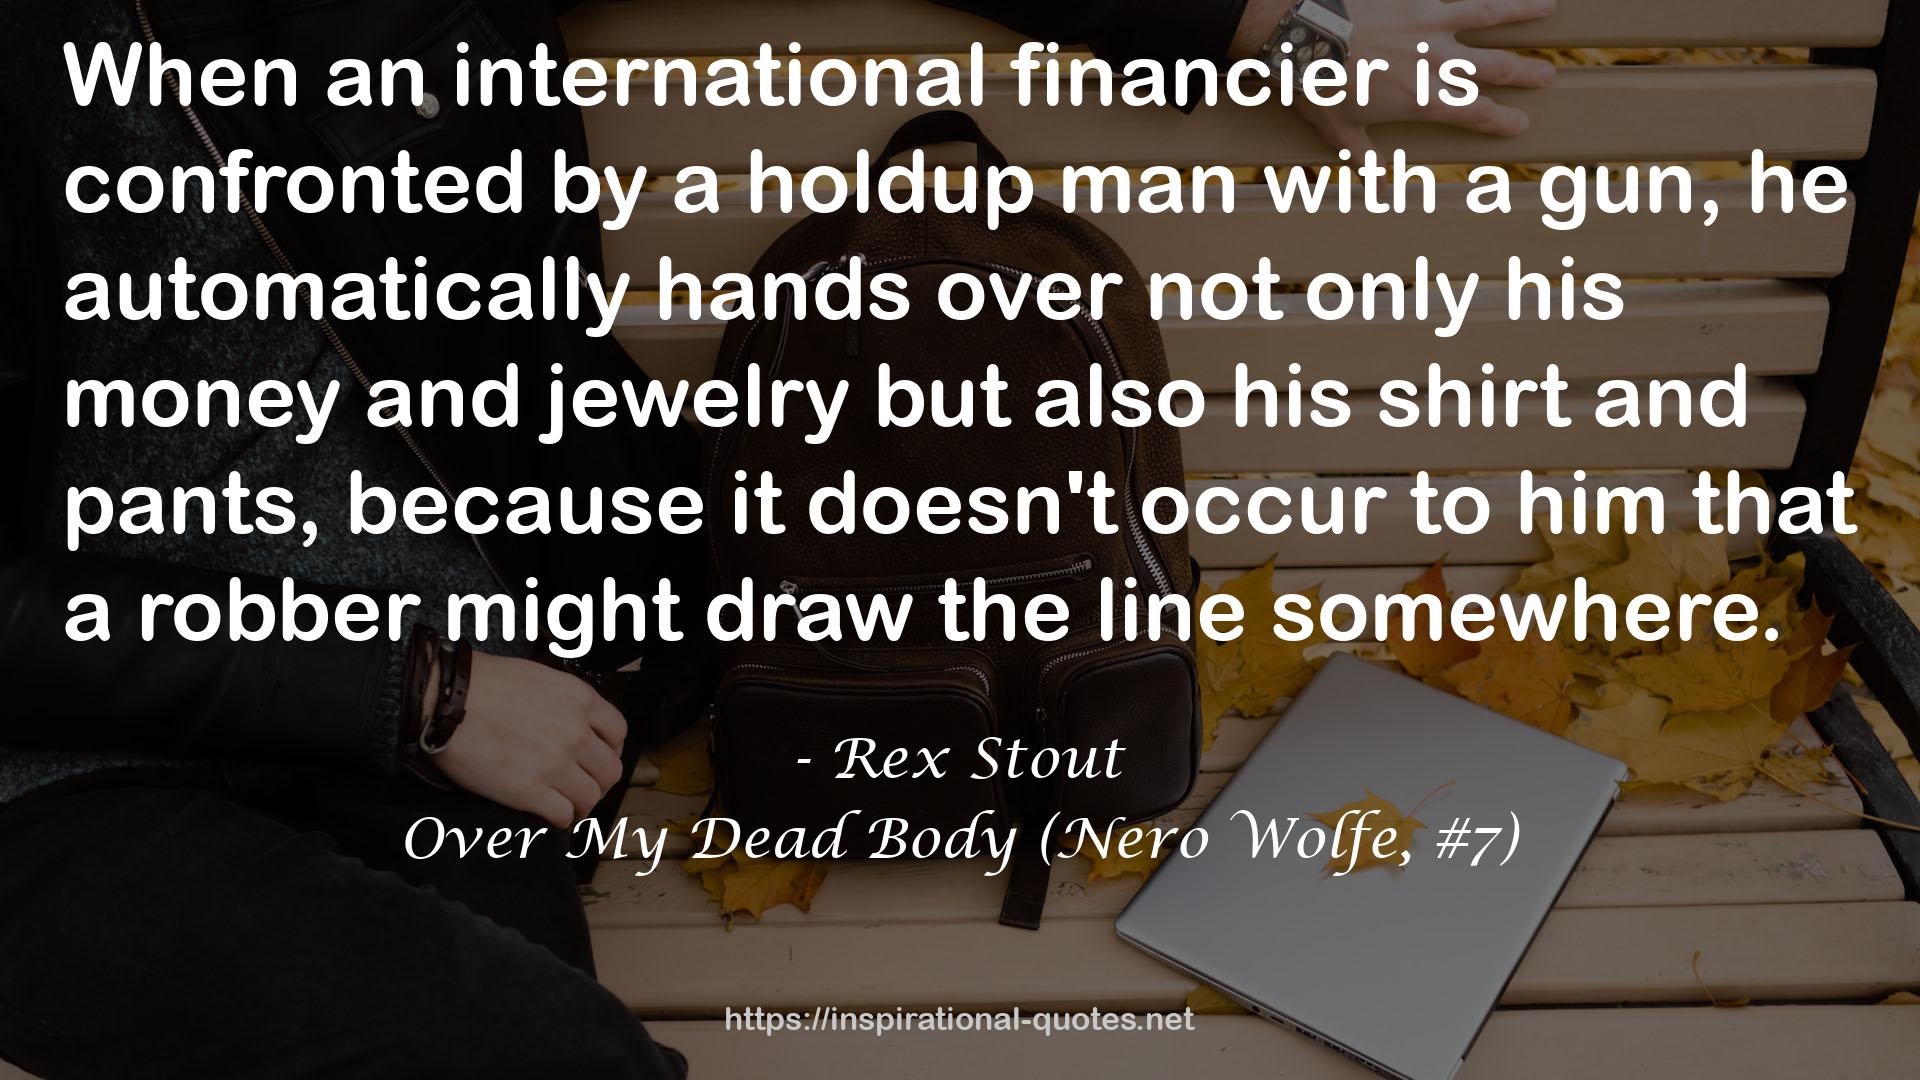 Over My Dead Body (Nero Wolfe, #7) QUOTES